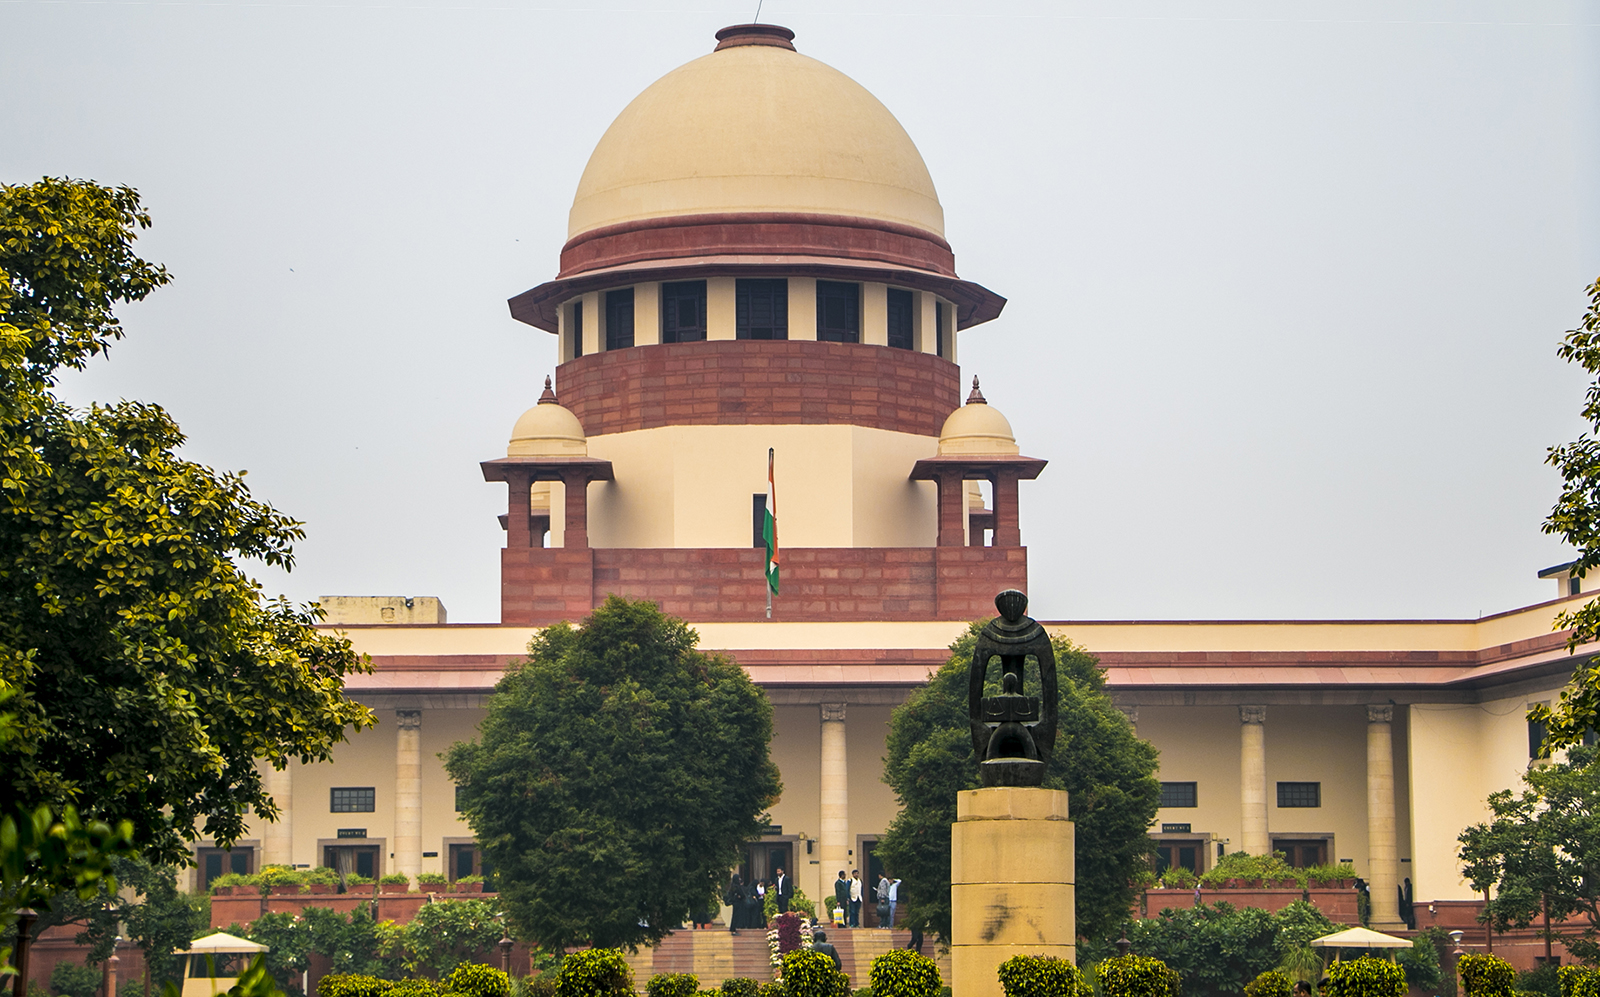 In India, where Hindu majority has complex views, Supreme Court liberalizes abortion law